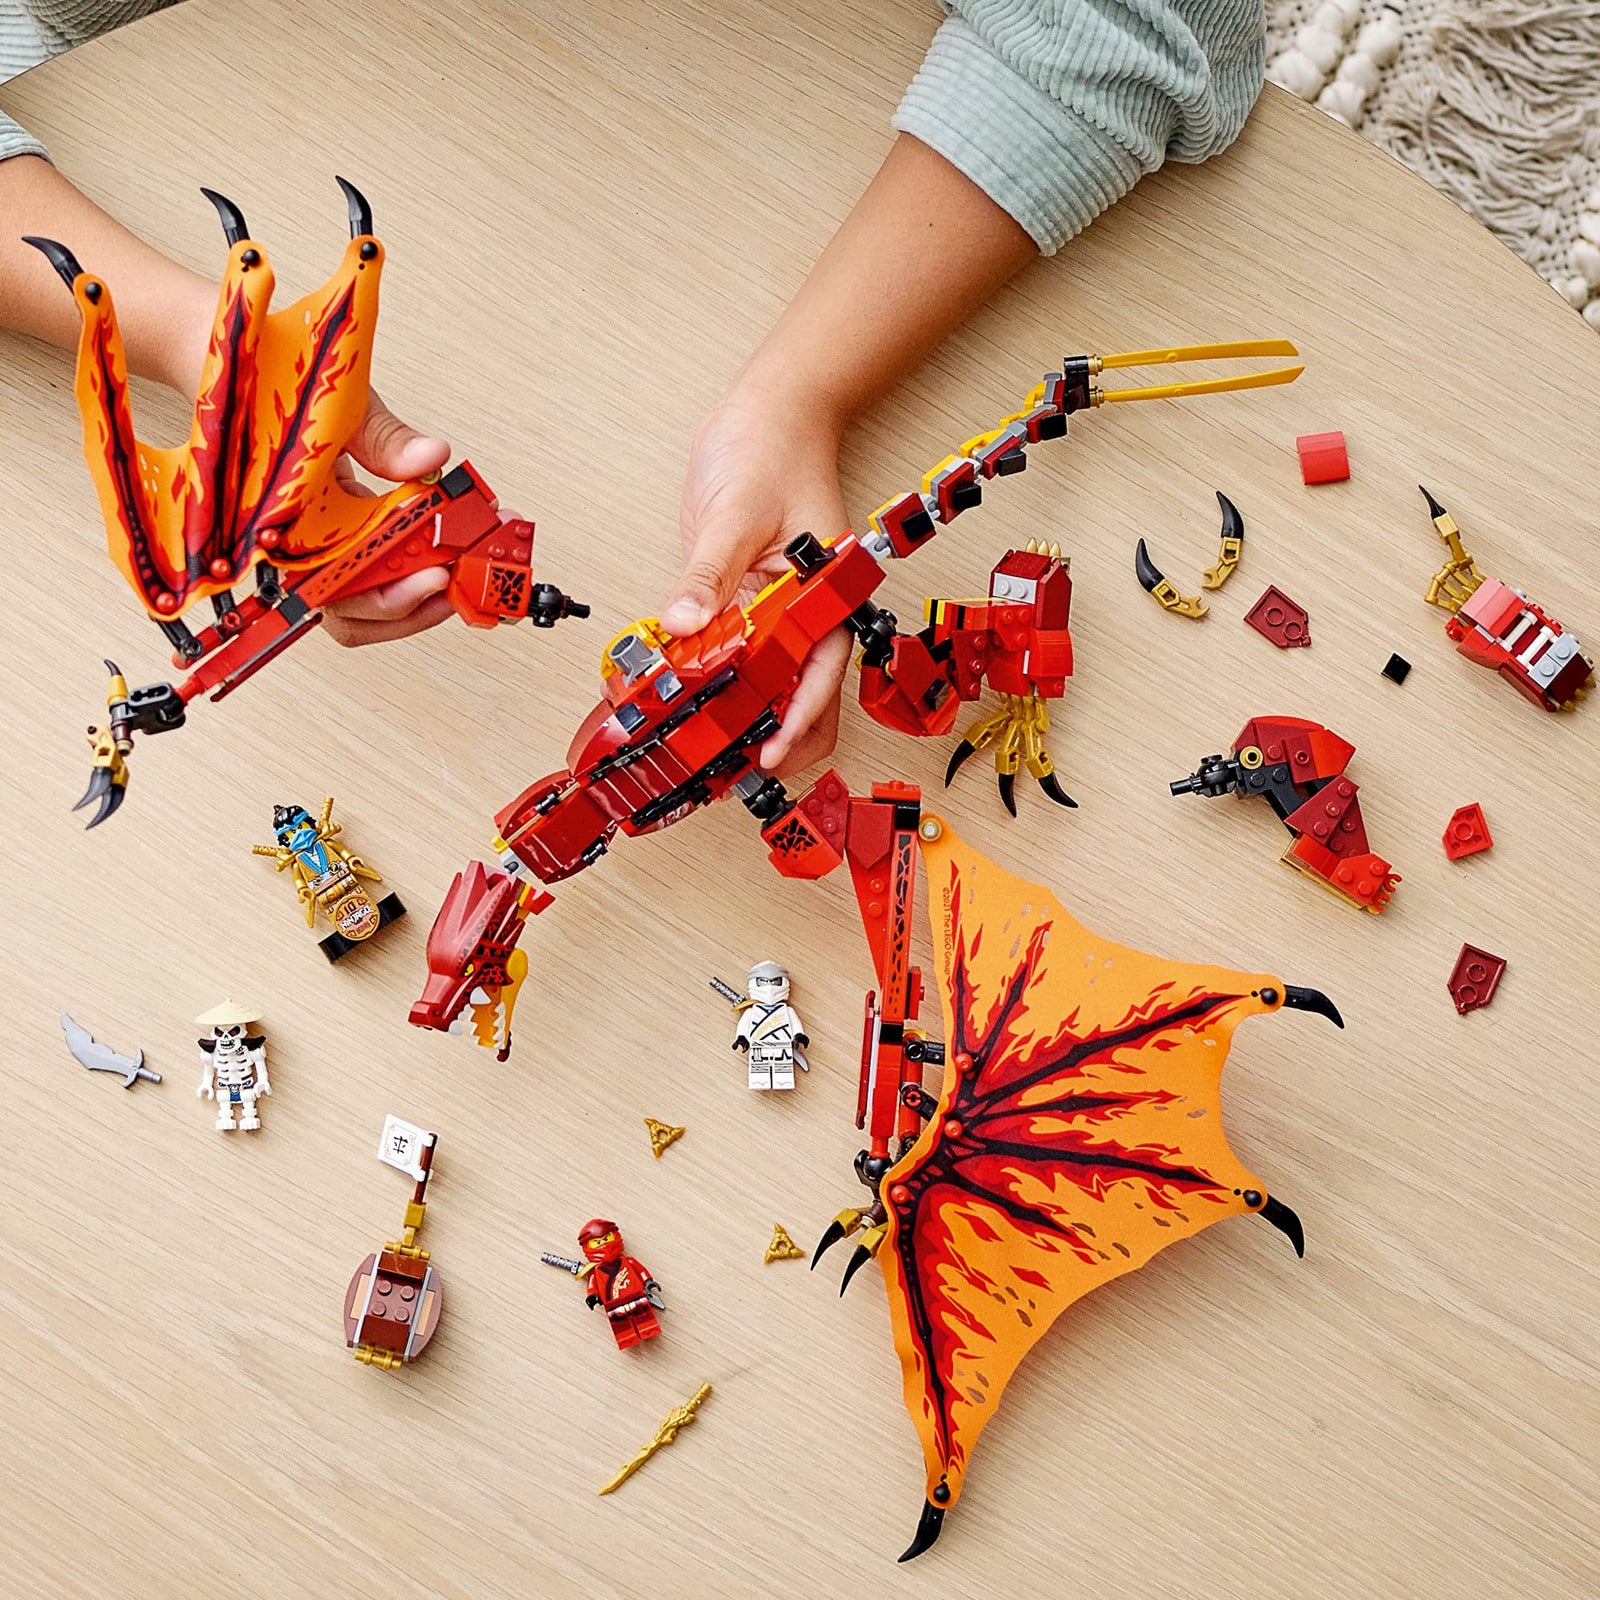 LEGO NINJAGO Legacy Fire Dragon Attack 71753 Ninja Playset Building Kit, Featuring a Flying Dragon Toy; New 2021 (563 Pieces)